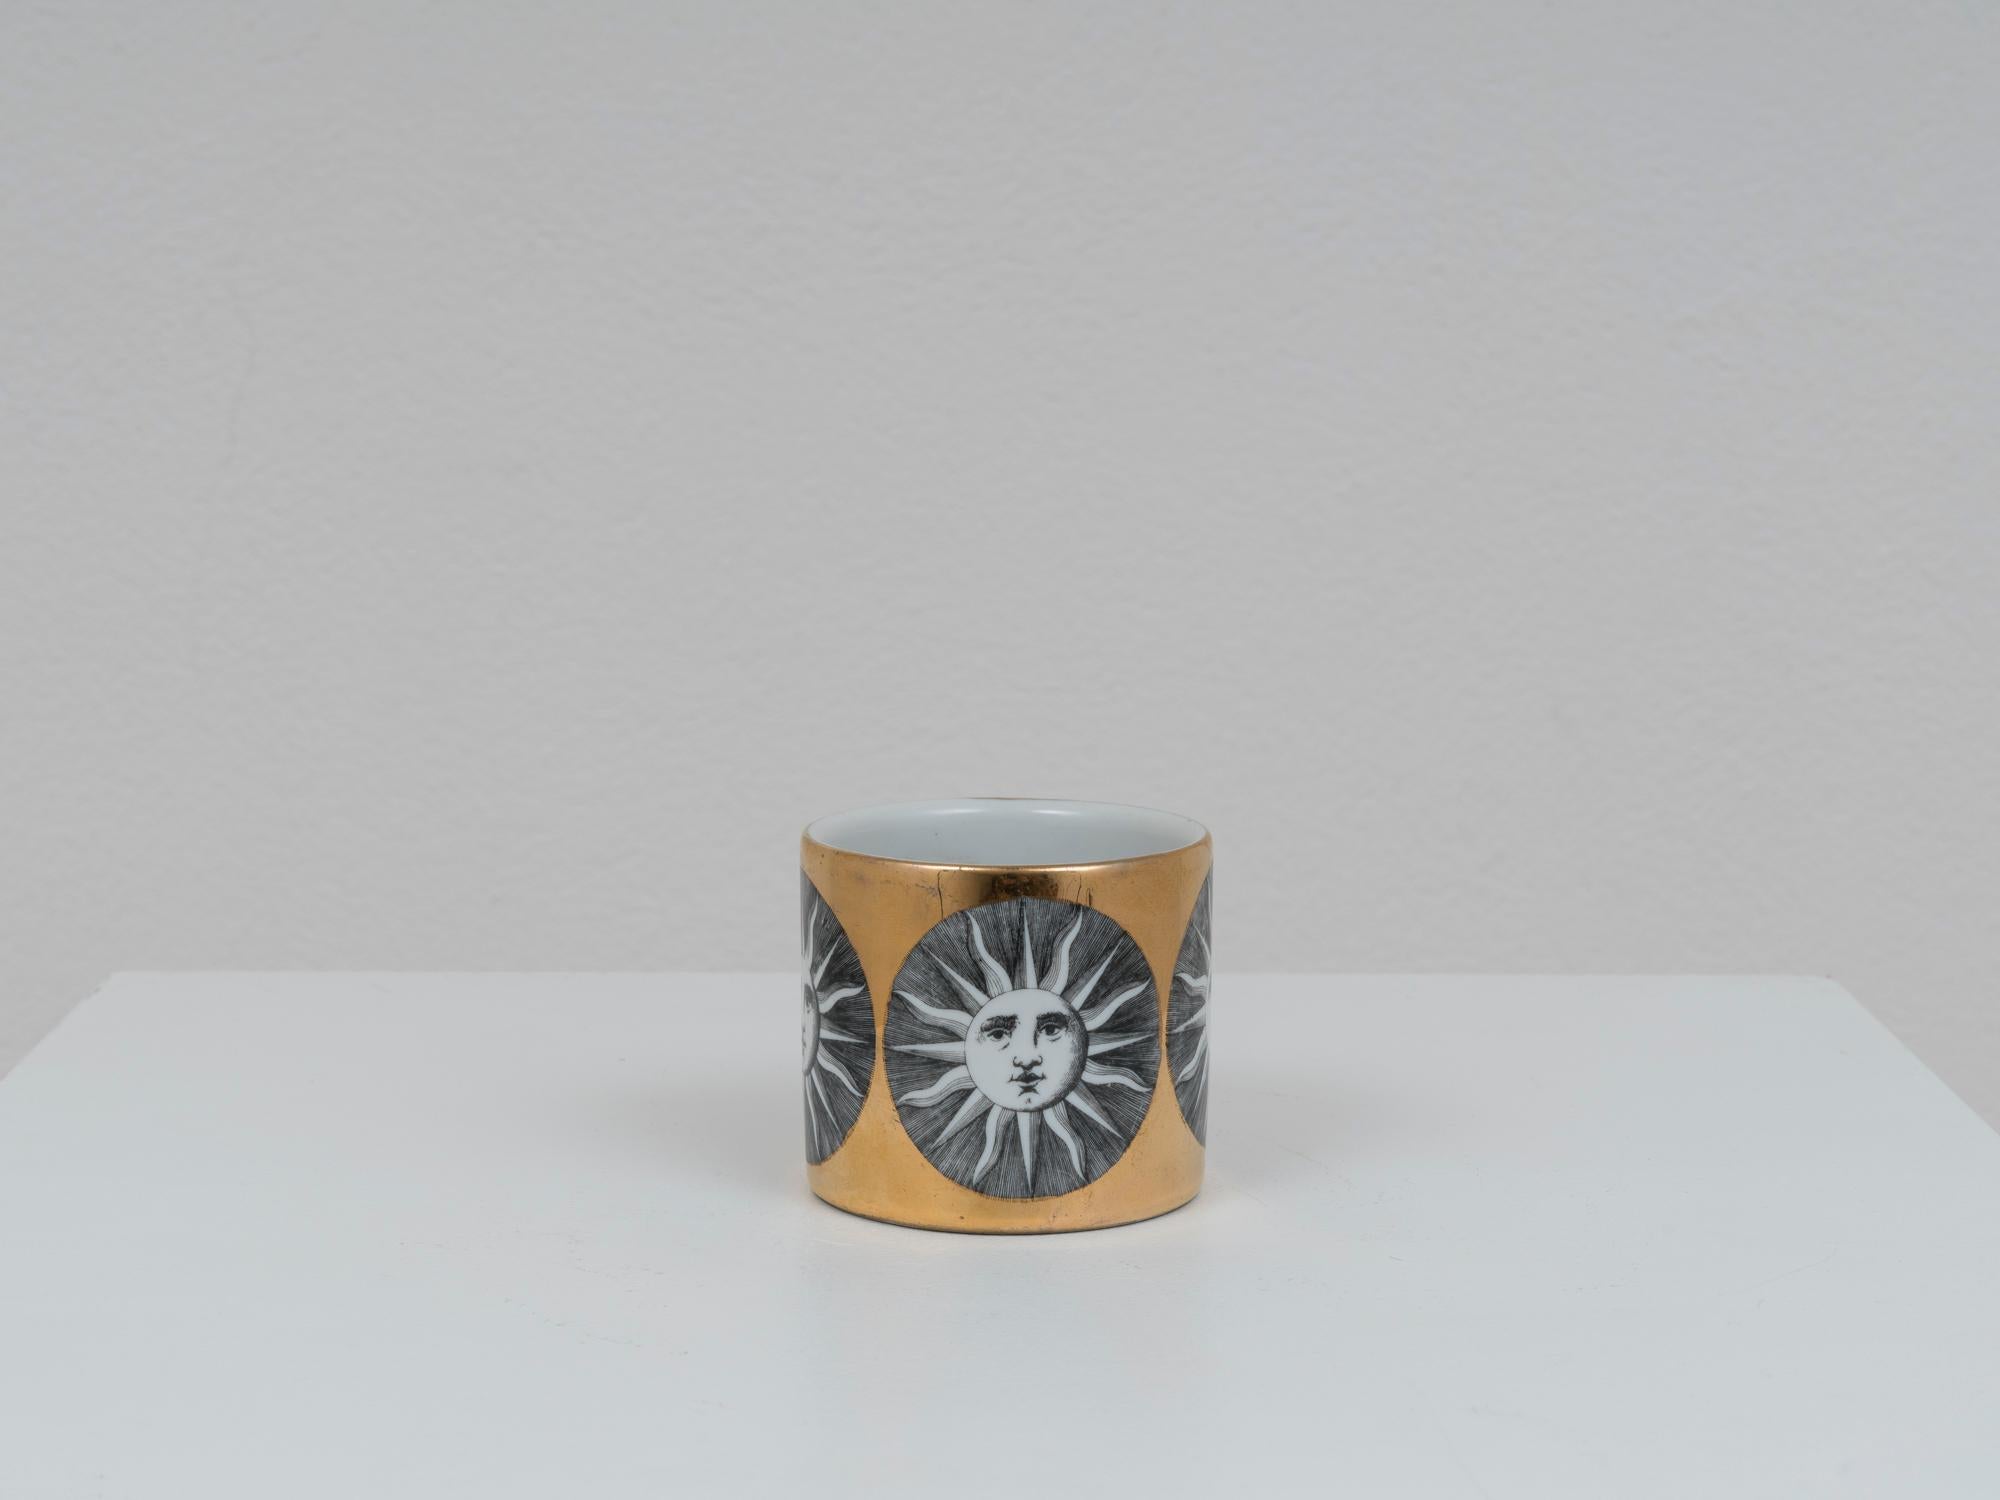 Beautiful pencil holder or small vase by Piero Fornasetti, in gilded glazed ceramic. This piece belogs to the designers' 1950s production. Iconic 